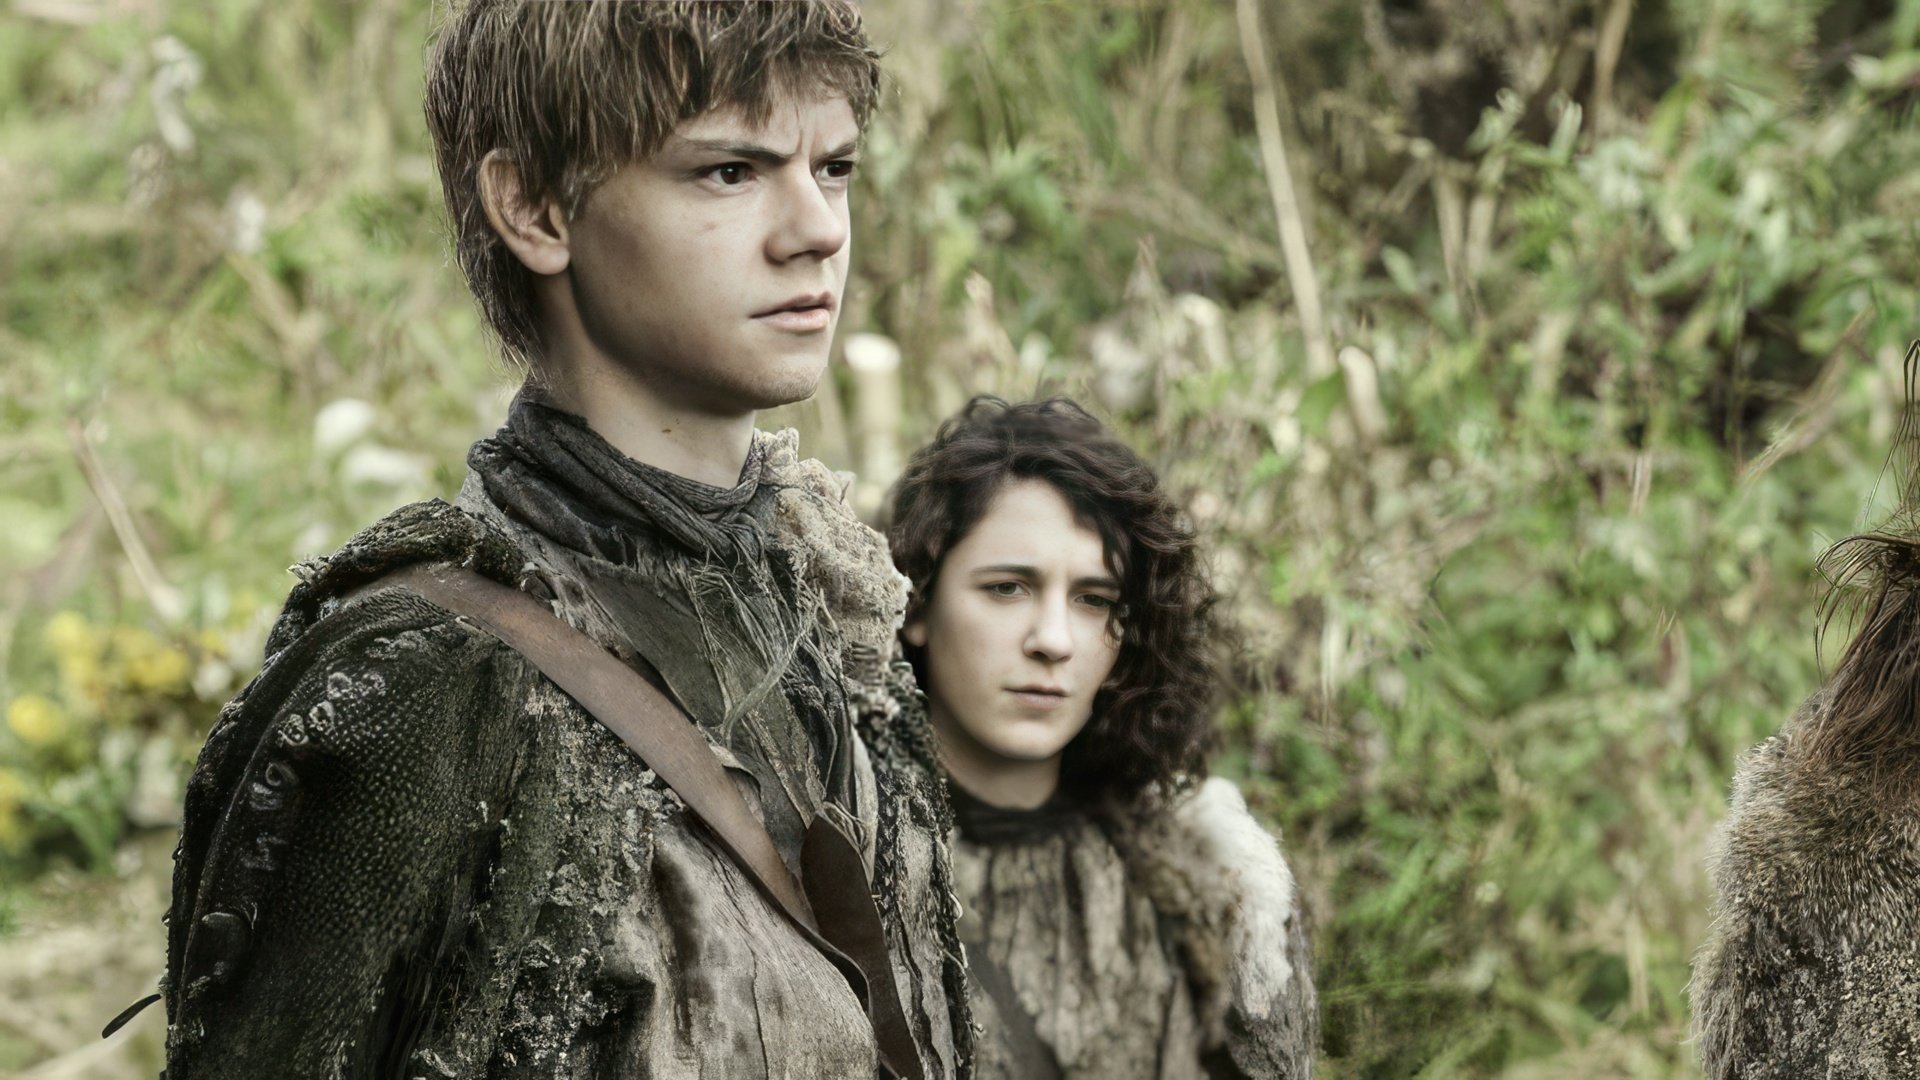 «Game of thrones»: Thomas Sangster in the role of Jojen Reed